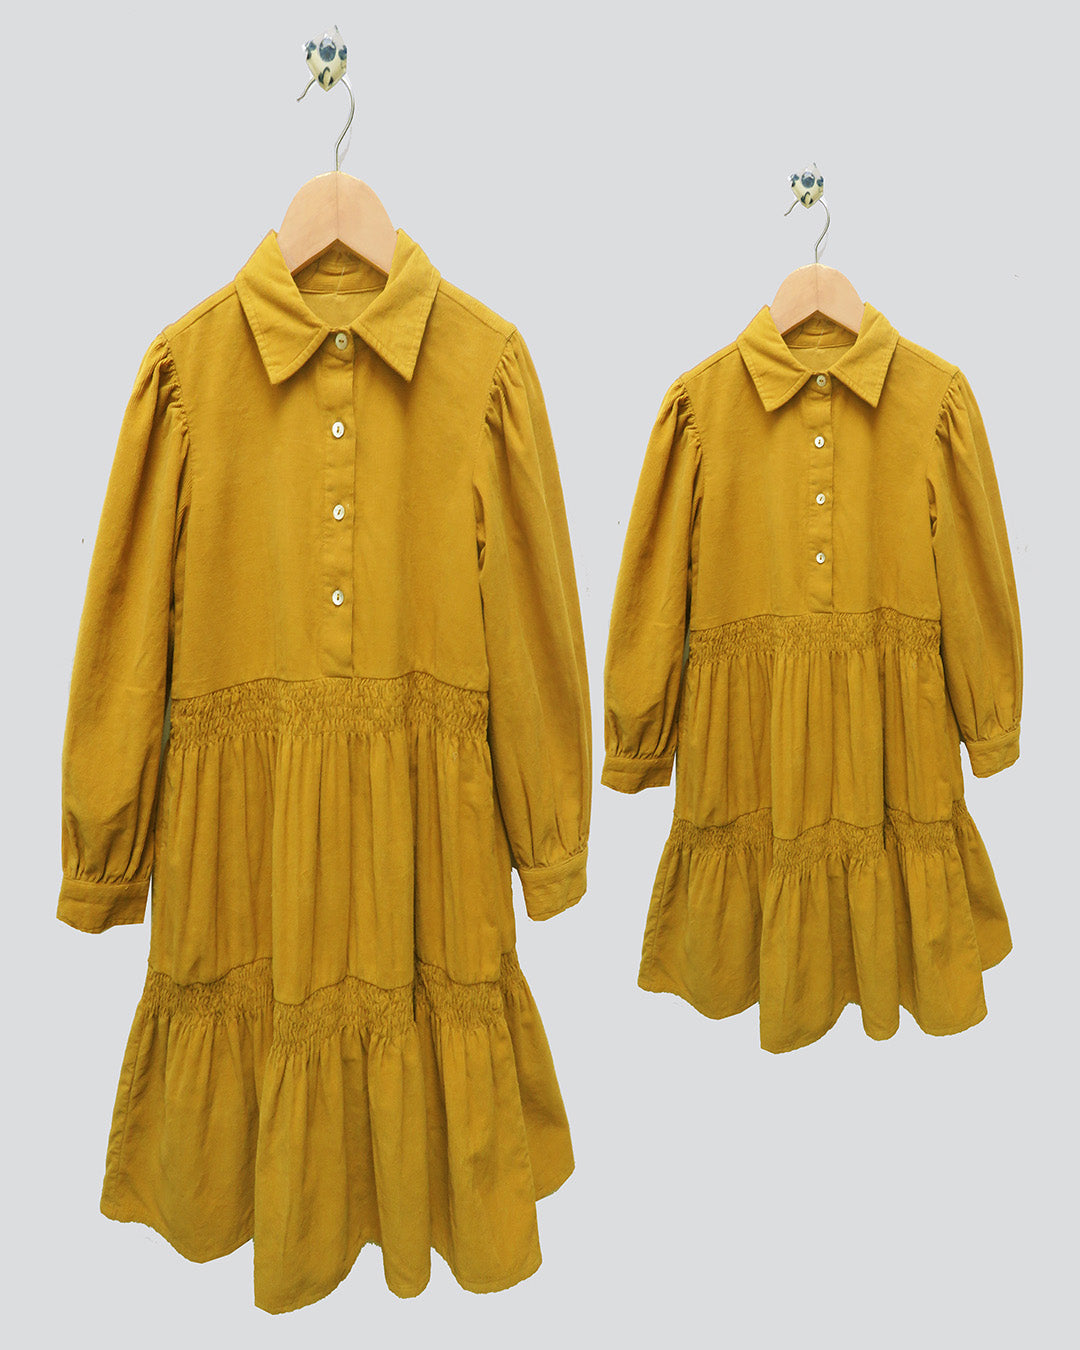 YELLOW SOFT AND COZY WINTER TWINNING DRESSES